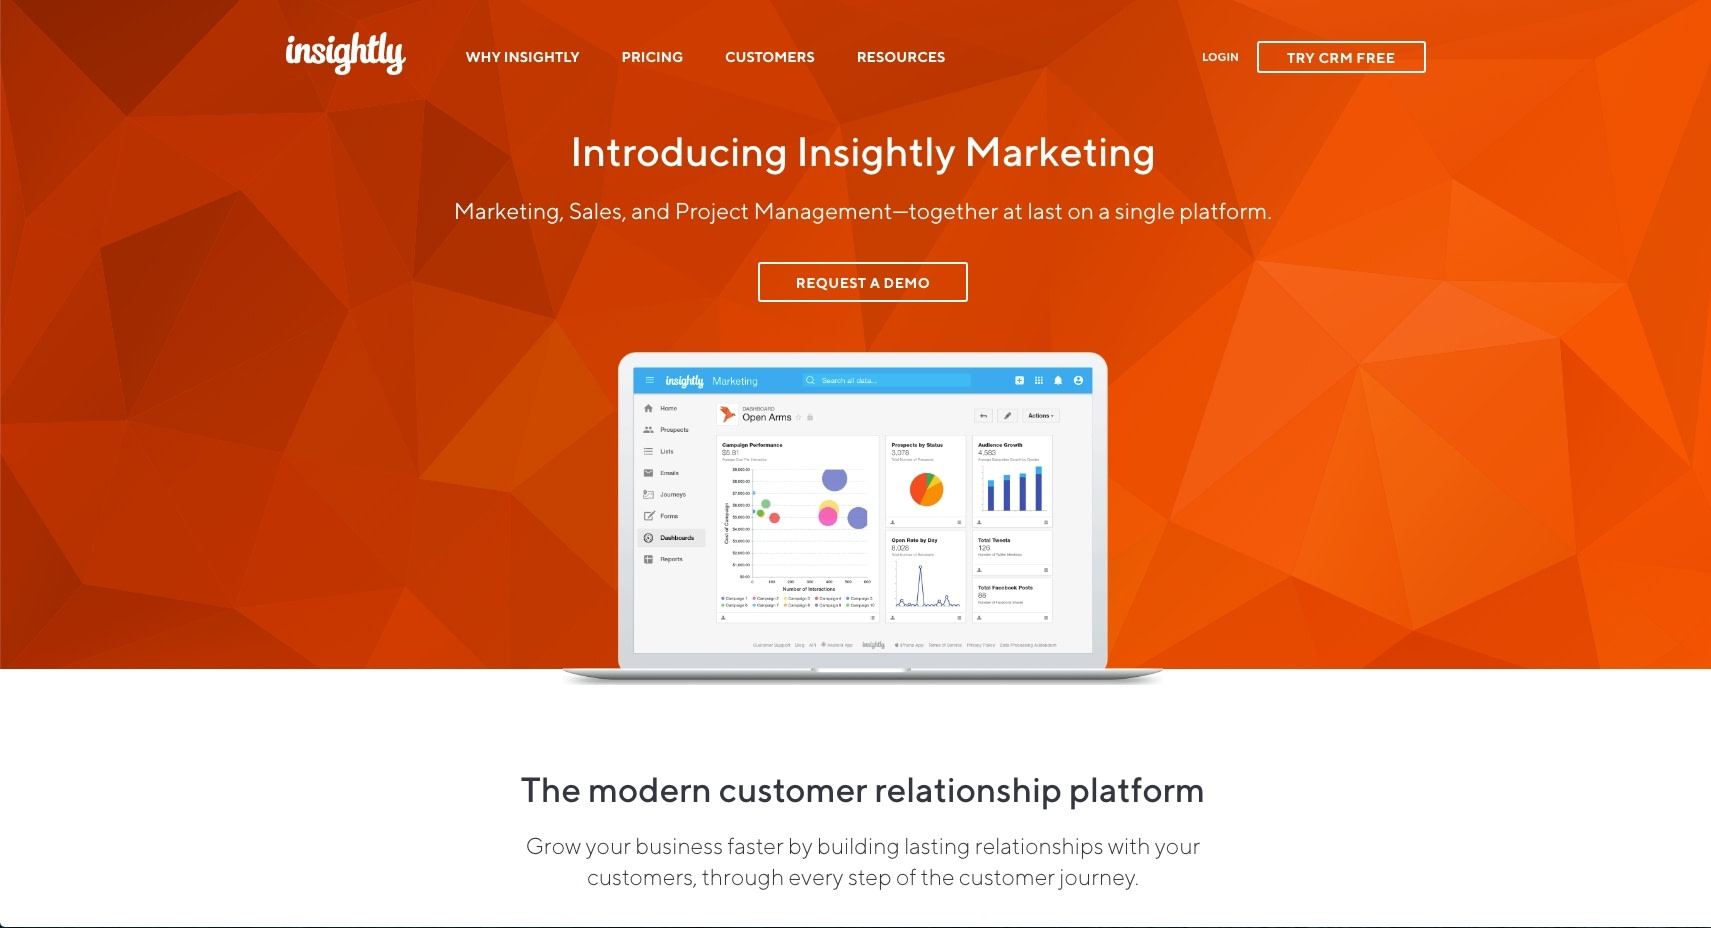 Insightly offers one of the best CRM for small businesses